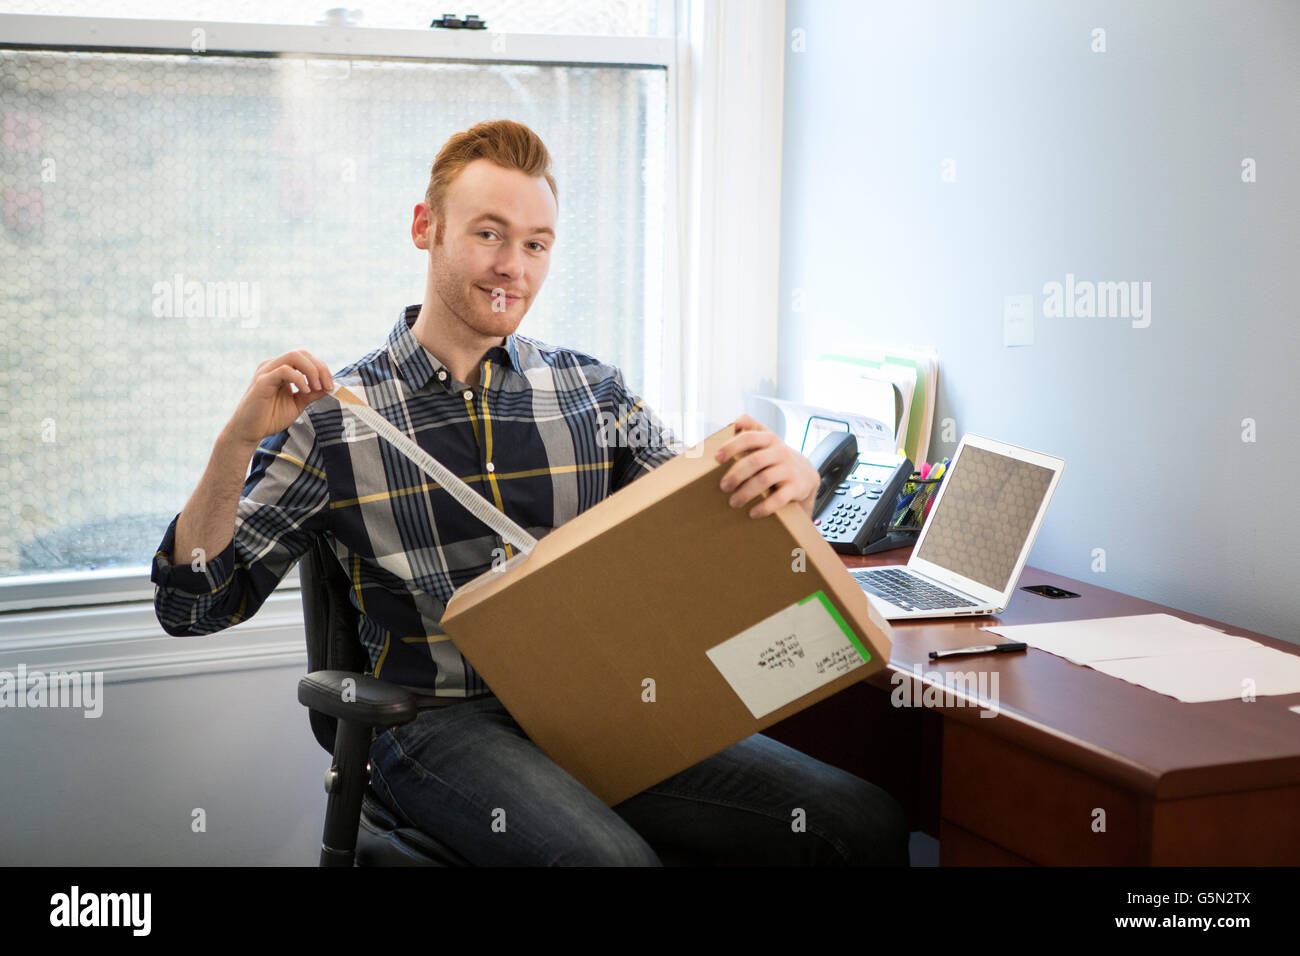 Caucasian businessman opening package in office Stock Photo